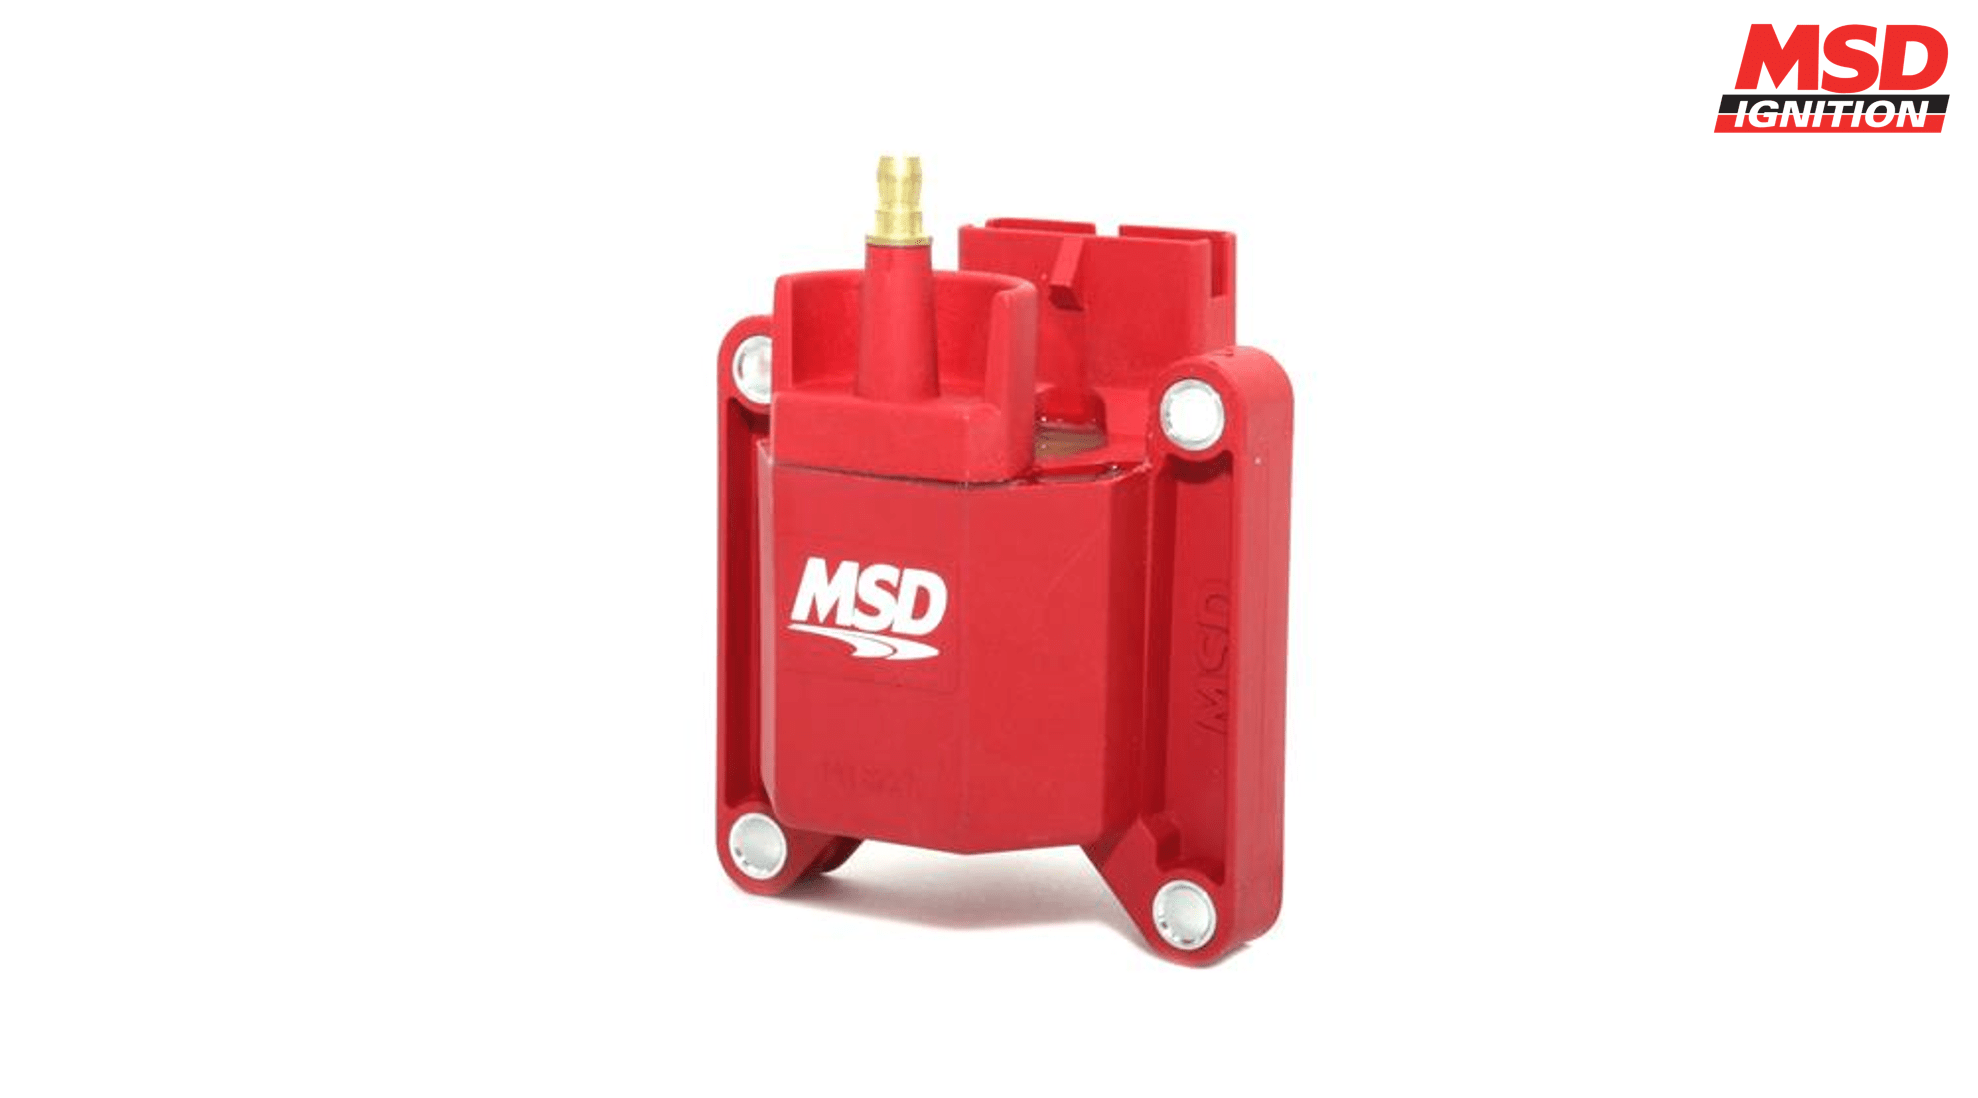 Find the best auto part for your vehicle: The MSD Ford TFI Red Ignition Coil Offers Increased Voltage And Energy Over The Stock Ford TFI Coil. Shop Them Now.